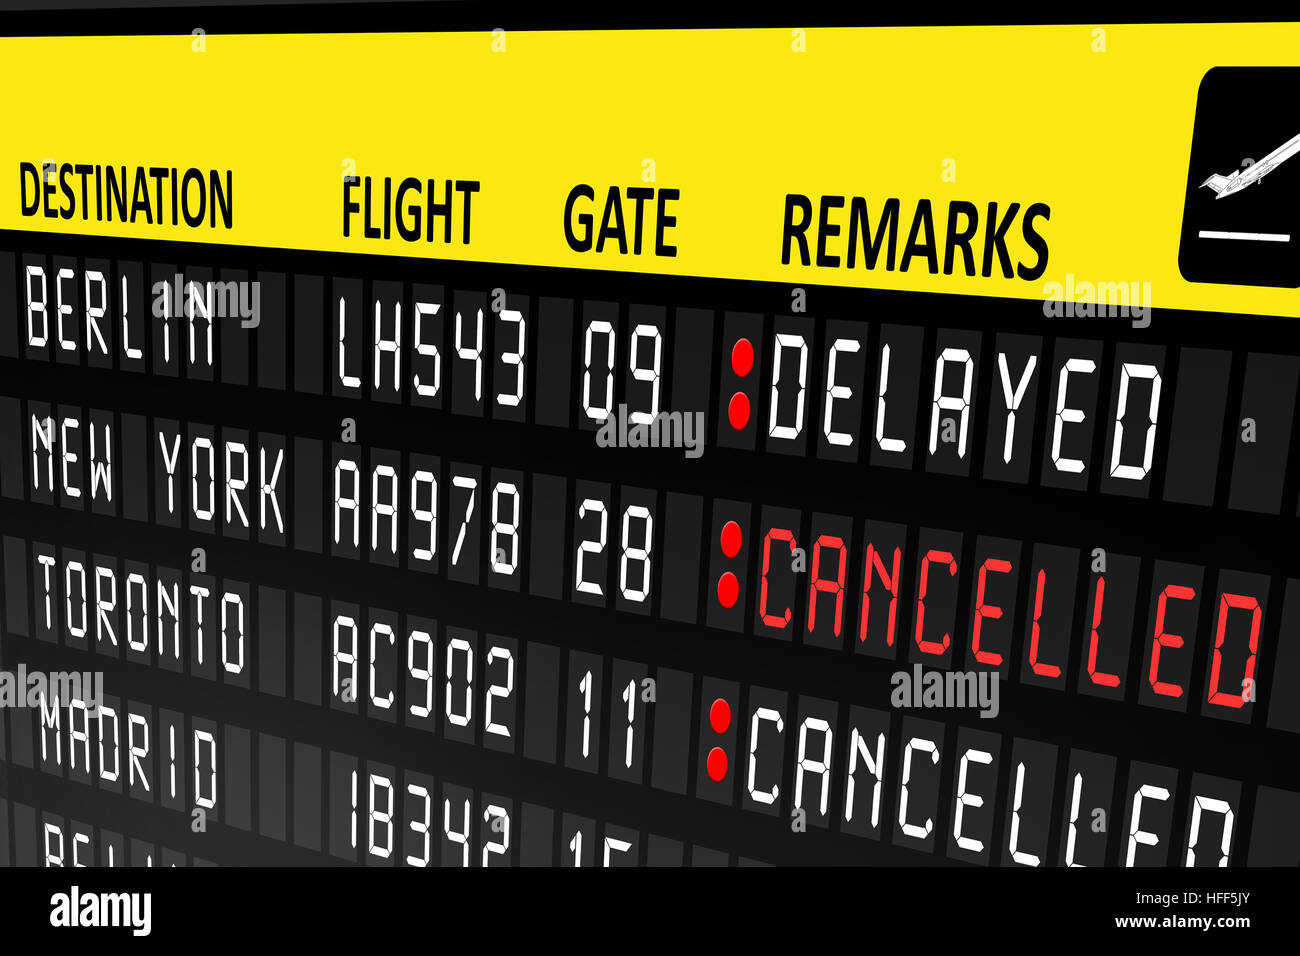 Flight delayed or cancelled display panel in airport Stock Photo